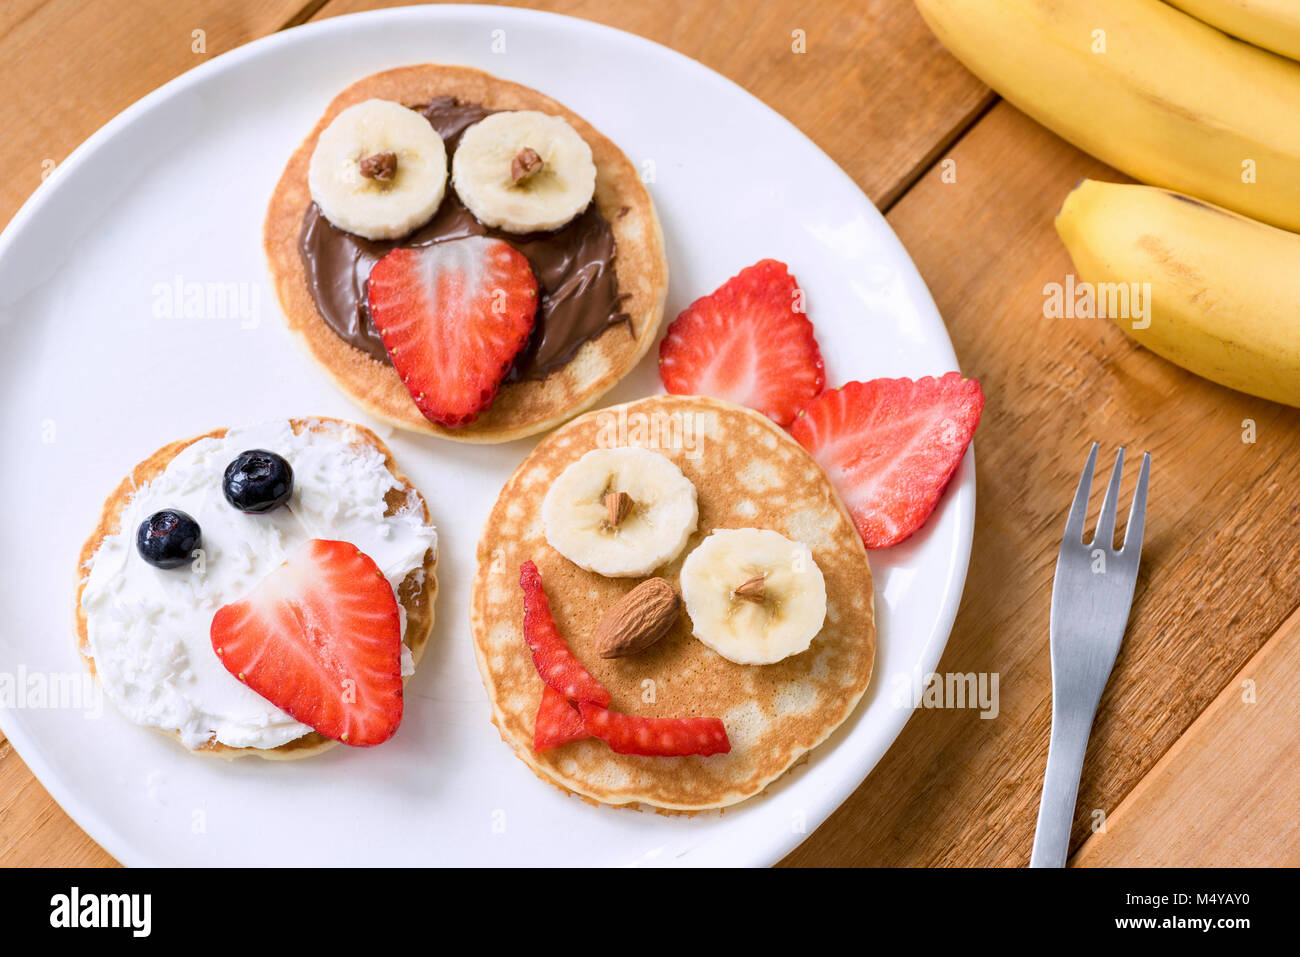 Pancakes With Funny Faces Decorated For Kids. Healthy Fruit Pancakes For Kids Meal Stock Photo